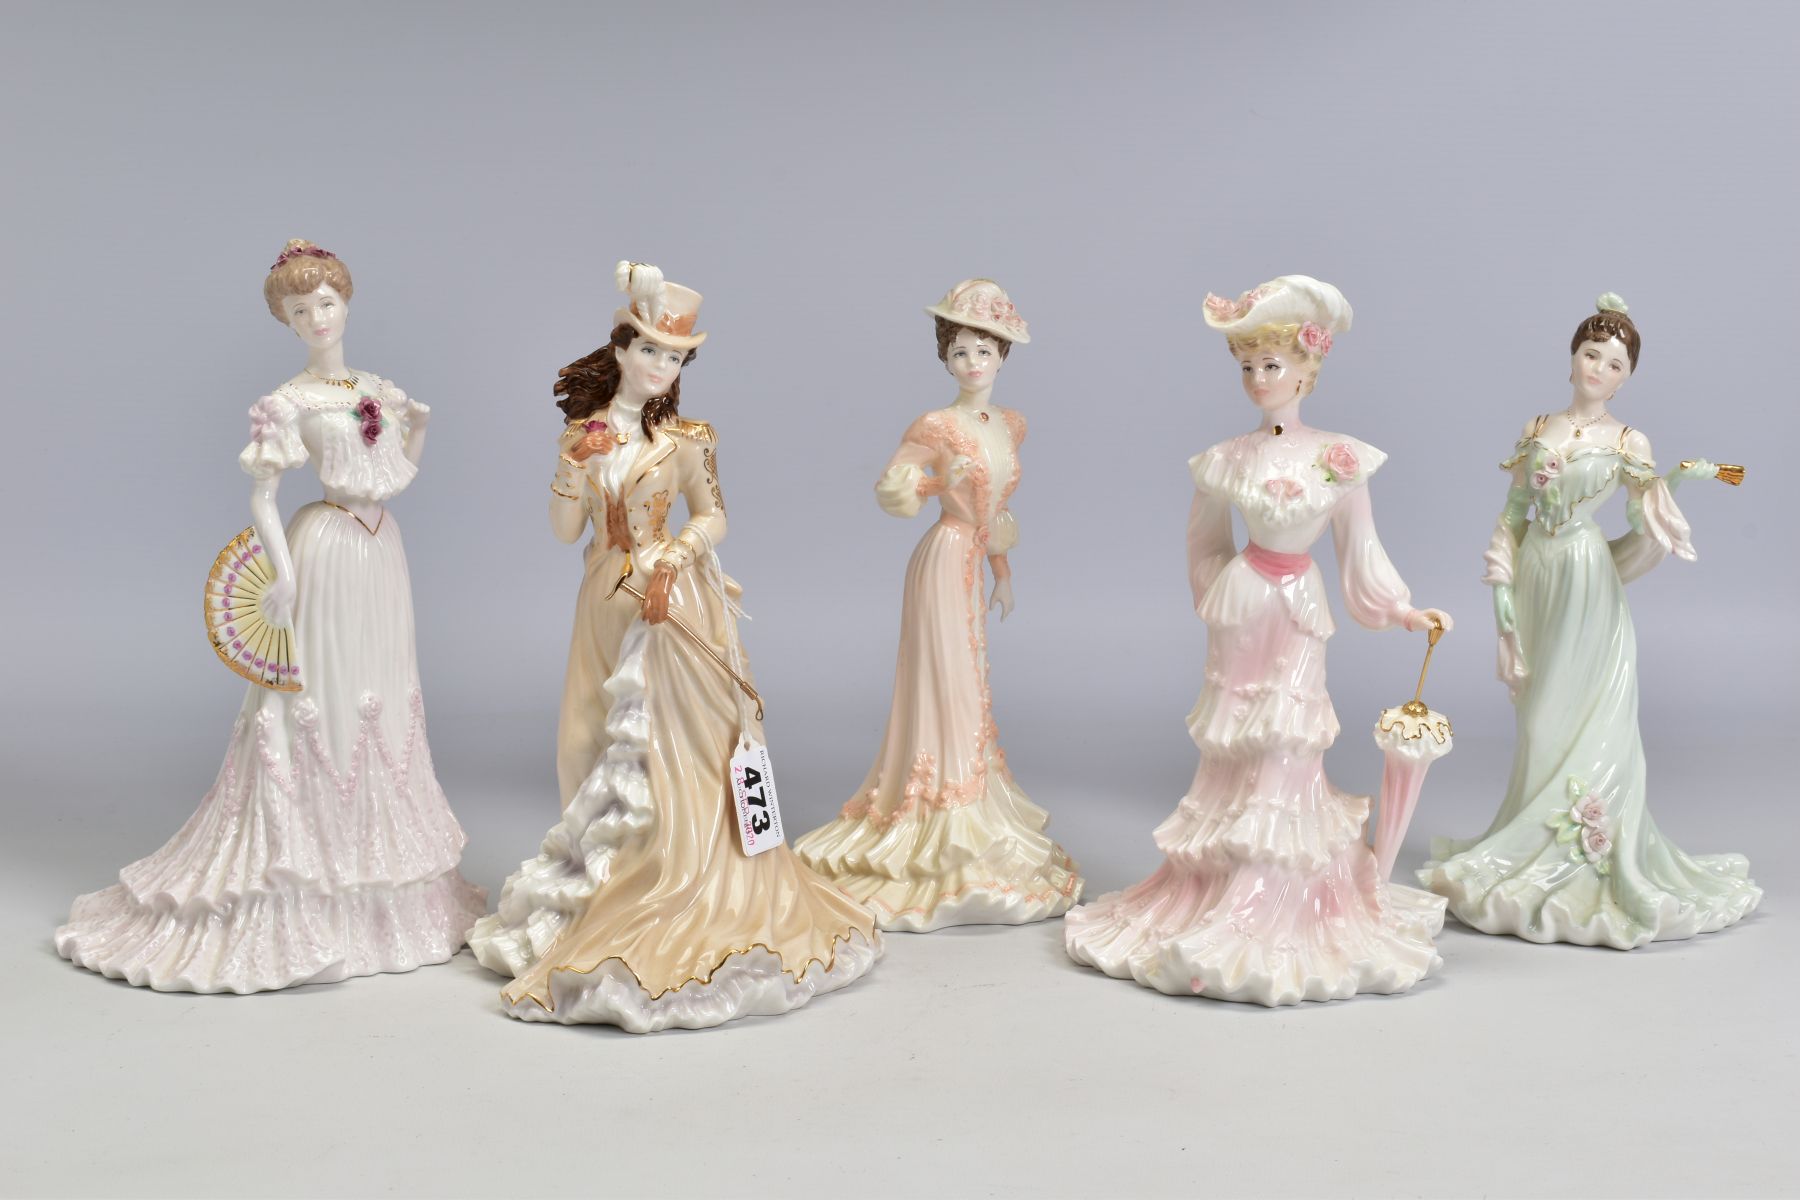 FIVE LIMITED EDITION COALPORT FIGURES FROM LA BELLE EPOQUE, 'Helena Riding in Hyde Park' No.1180/